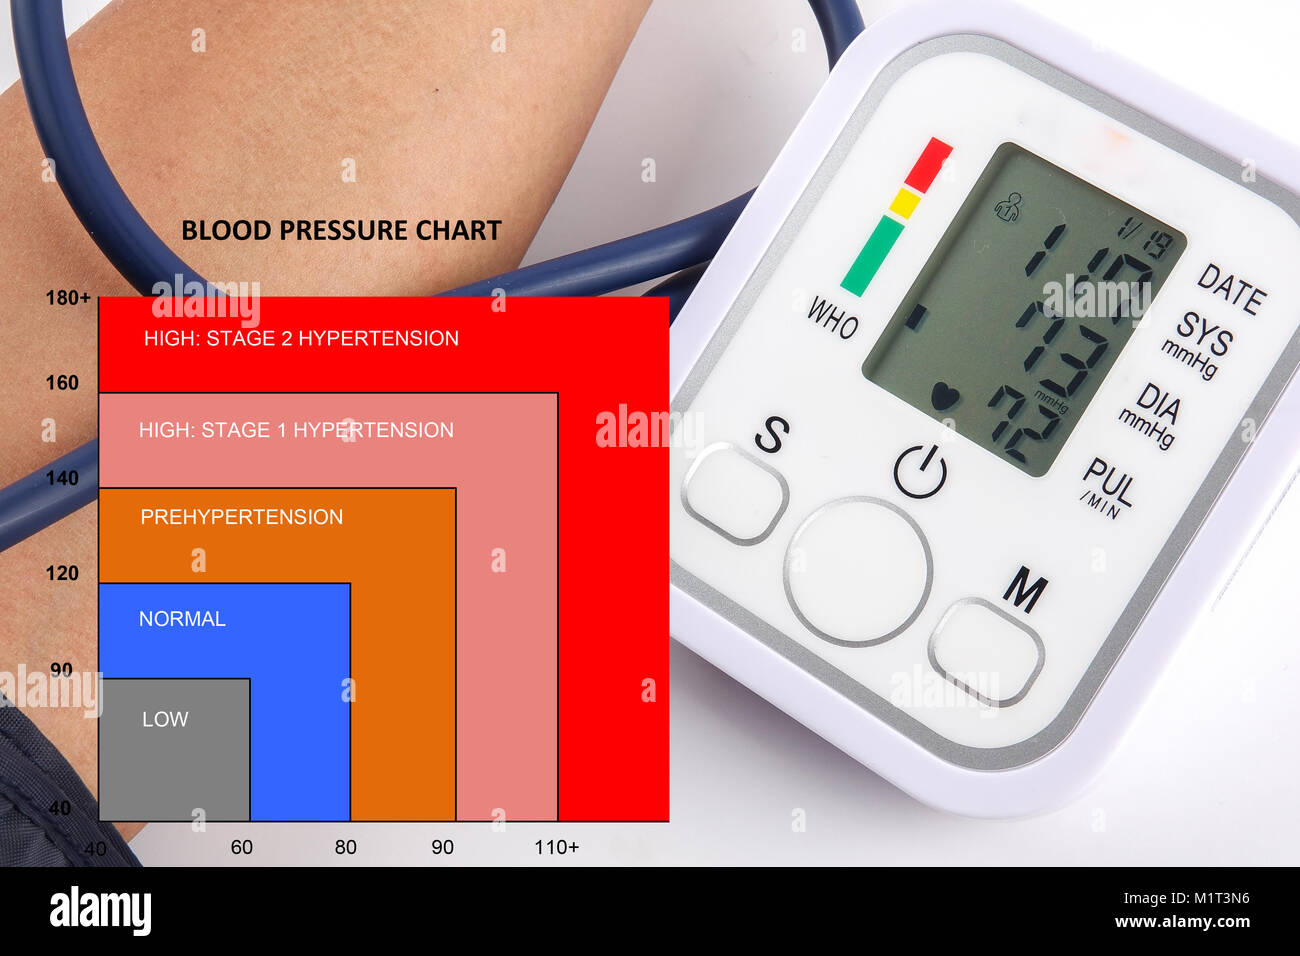 Blood Pressure Chart With Blood Pressure Meter Stock Photo Alamy